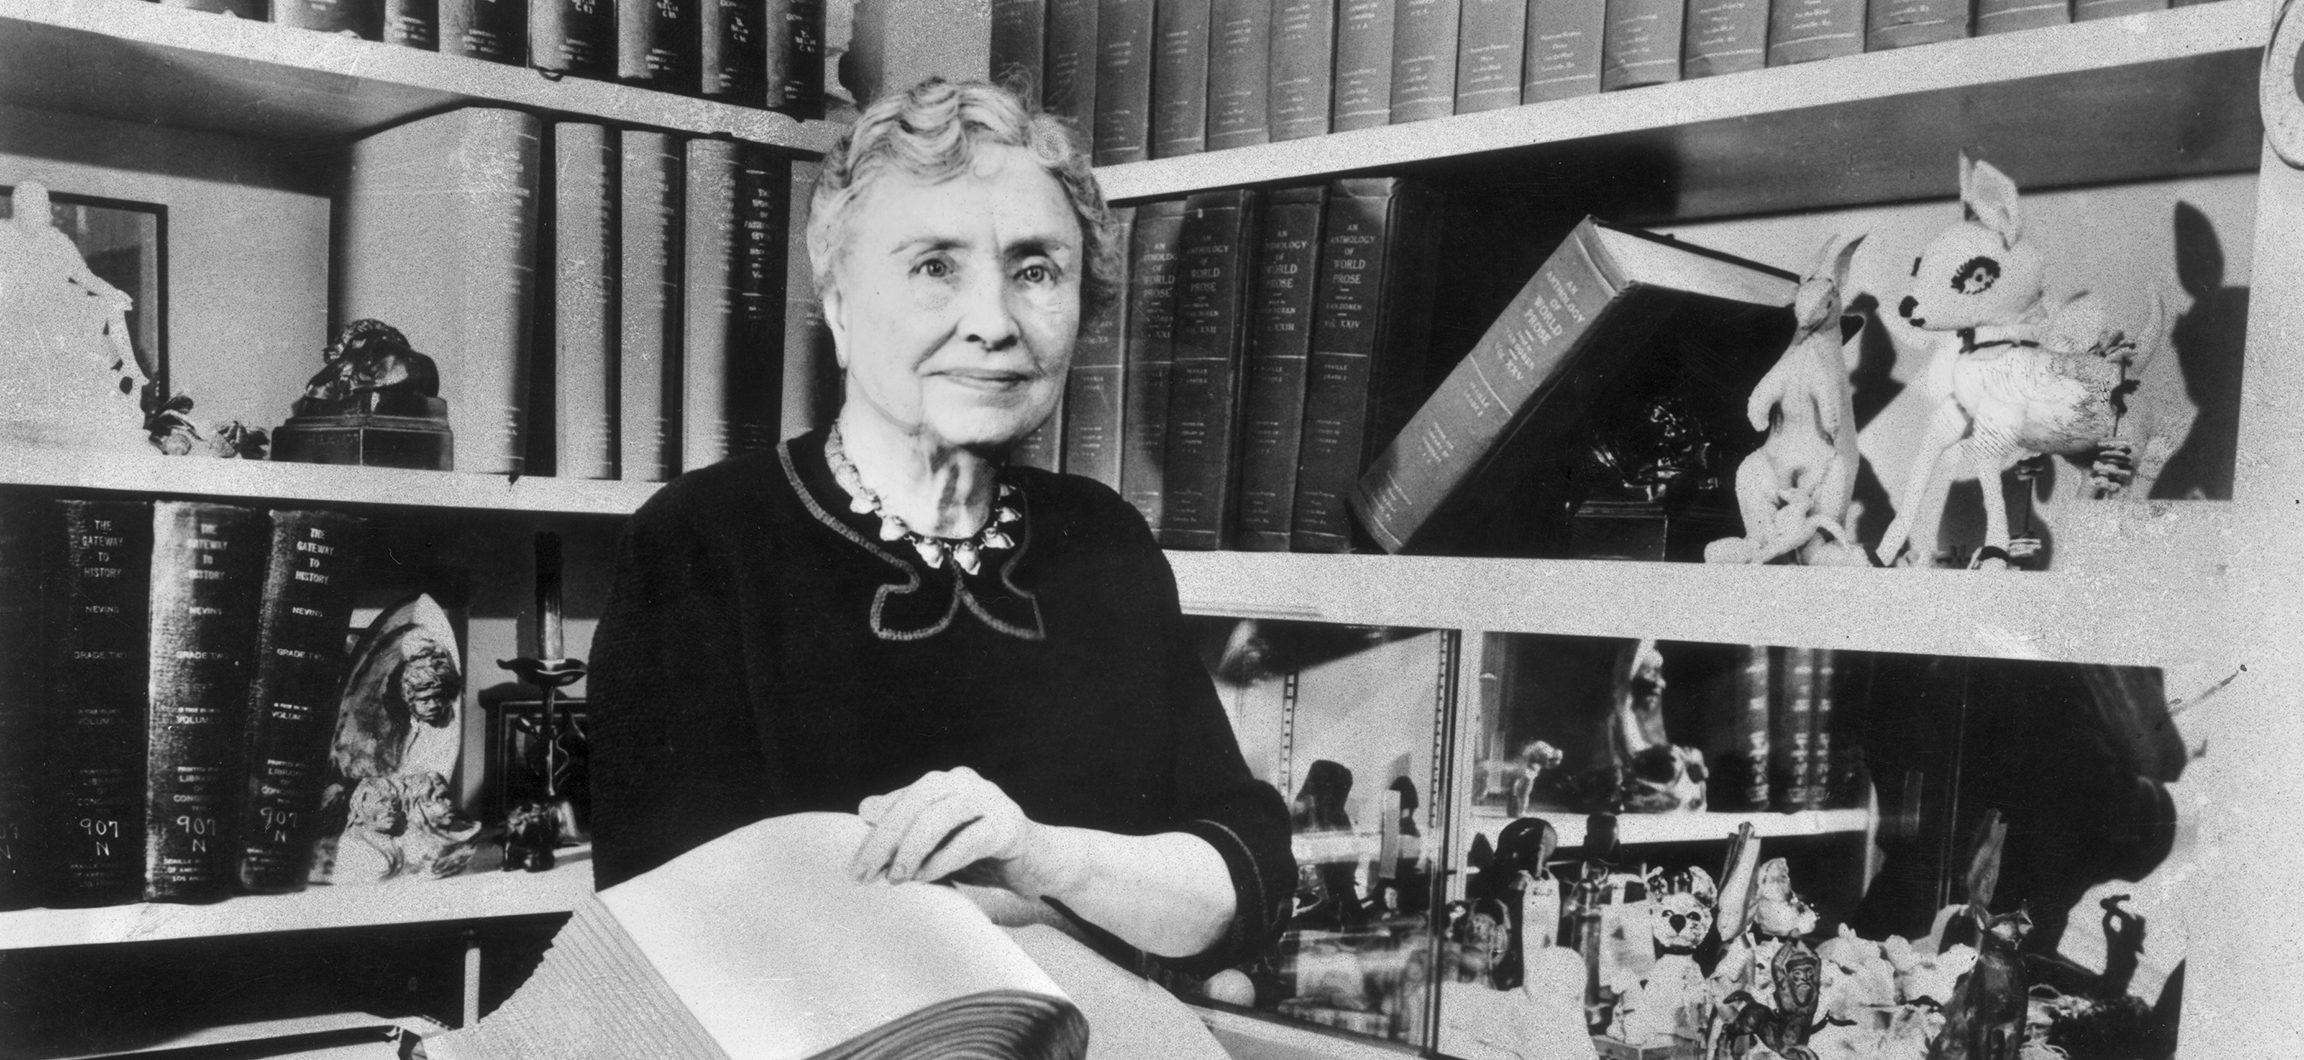 Portrait of American writer, educator and advocate for the disabled Helen Keller (1880 - 1968) holding a Braille volume and surrounded by shelves containing books and decorative figurines. A childhood illness left Keller blind, deaf and mute. (Photo by Hulton Archive/Getty Images)